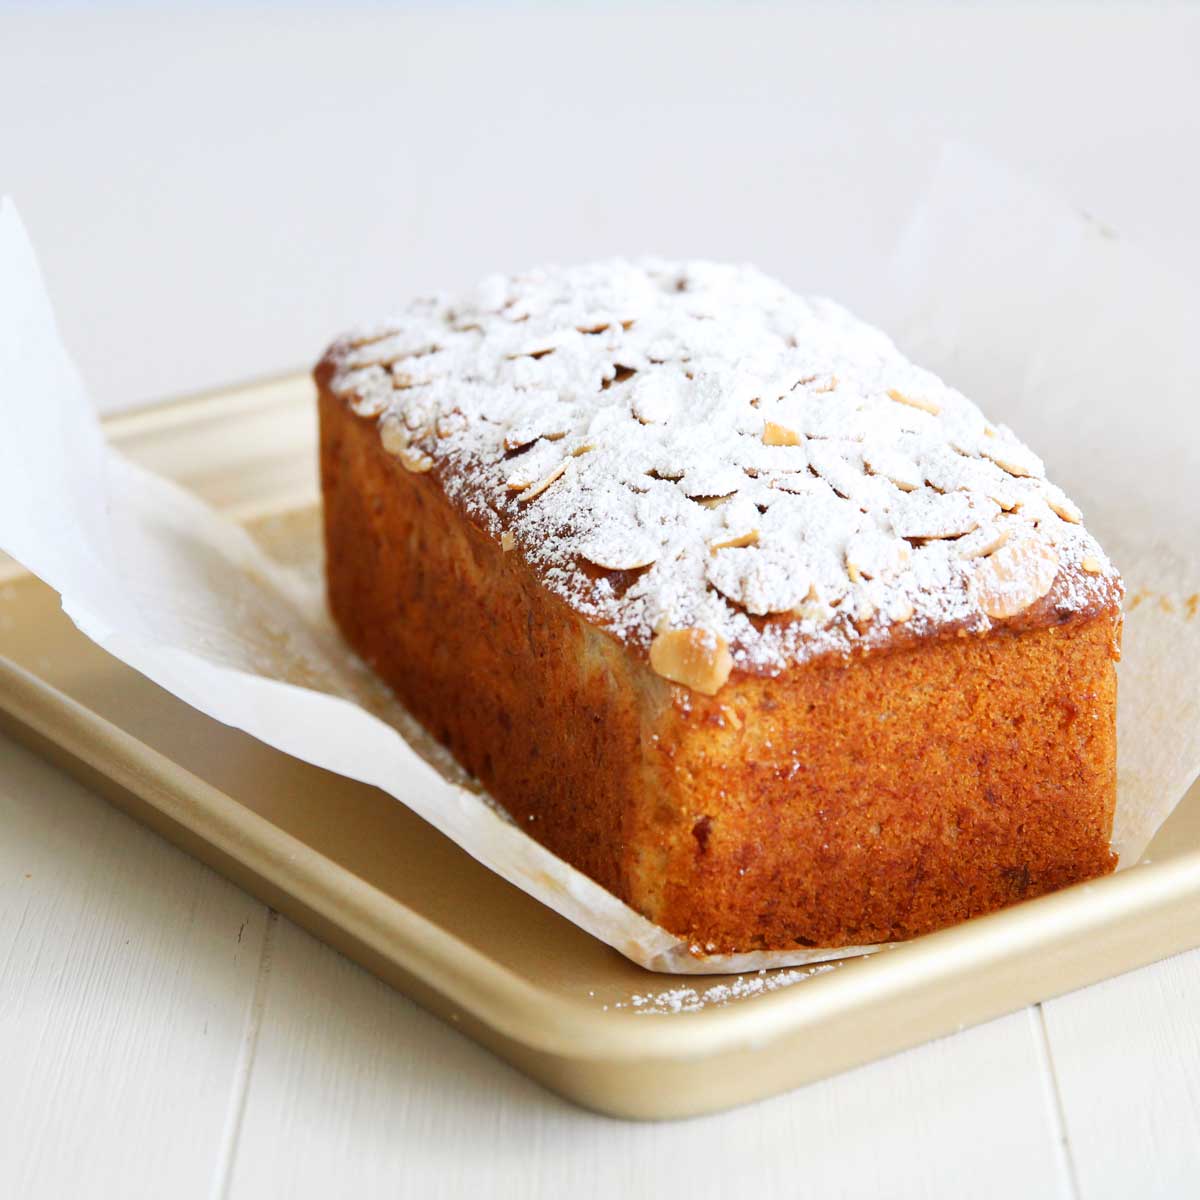 Simply Divine: Moist Vegan Almond Banana Bread with Apricots (Eggless, Dairy Free!) - Almond Banana Bread